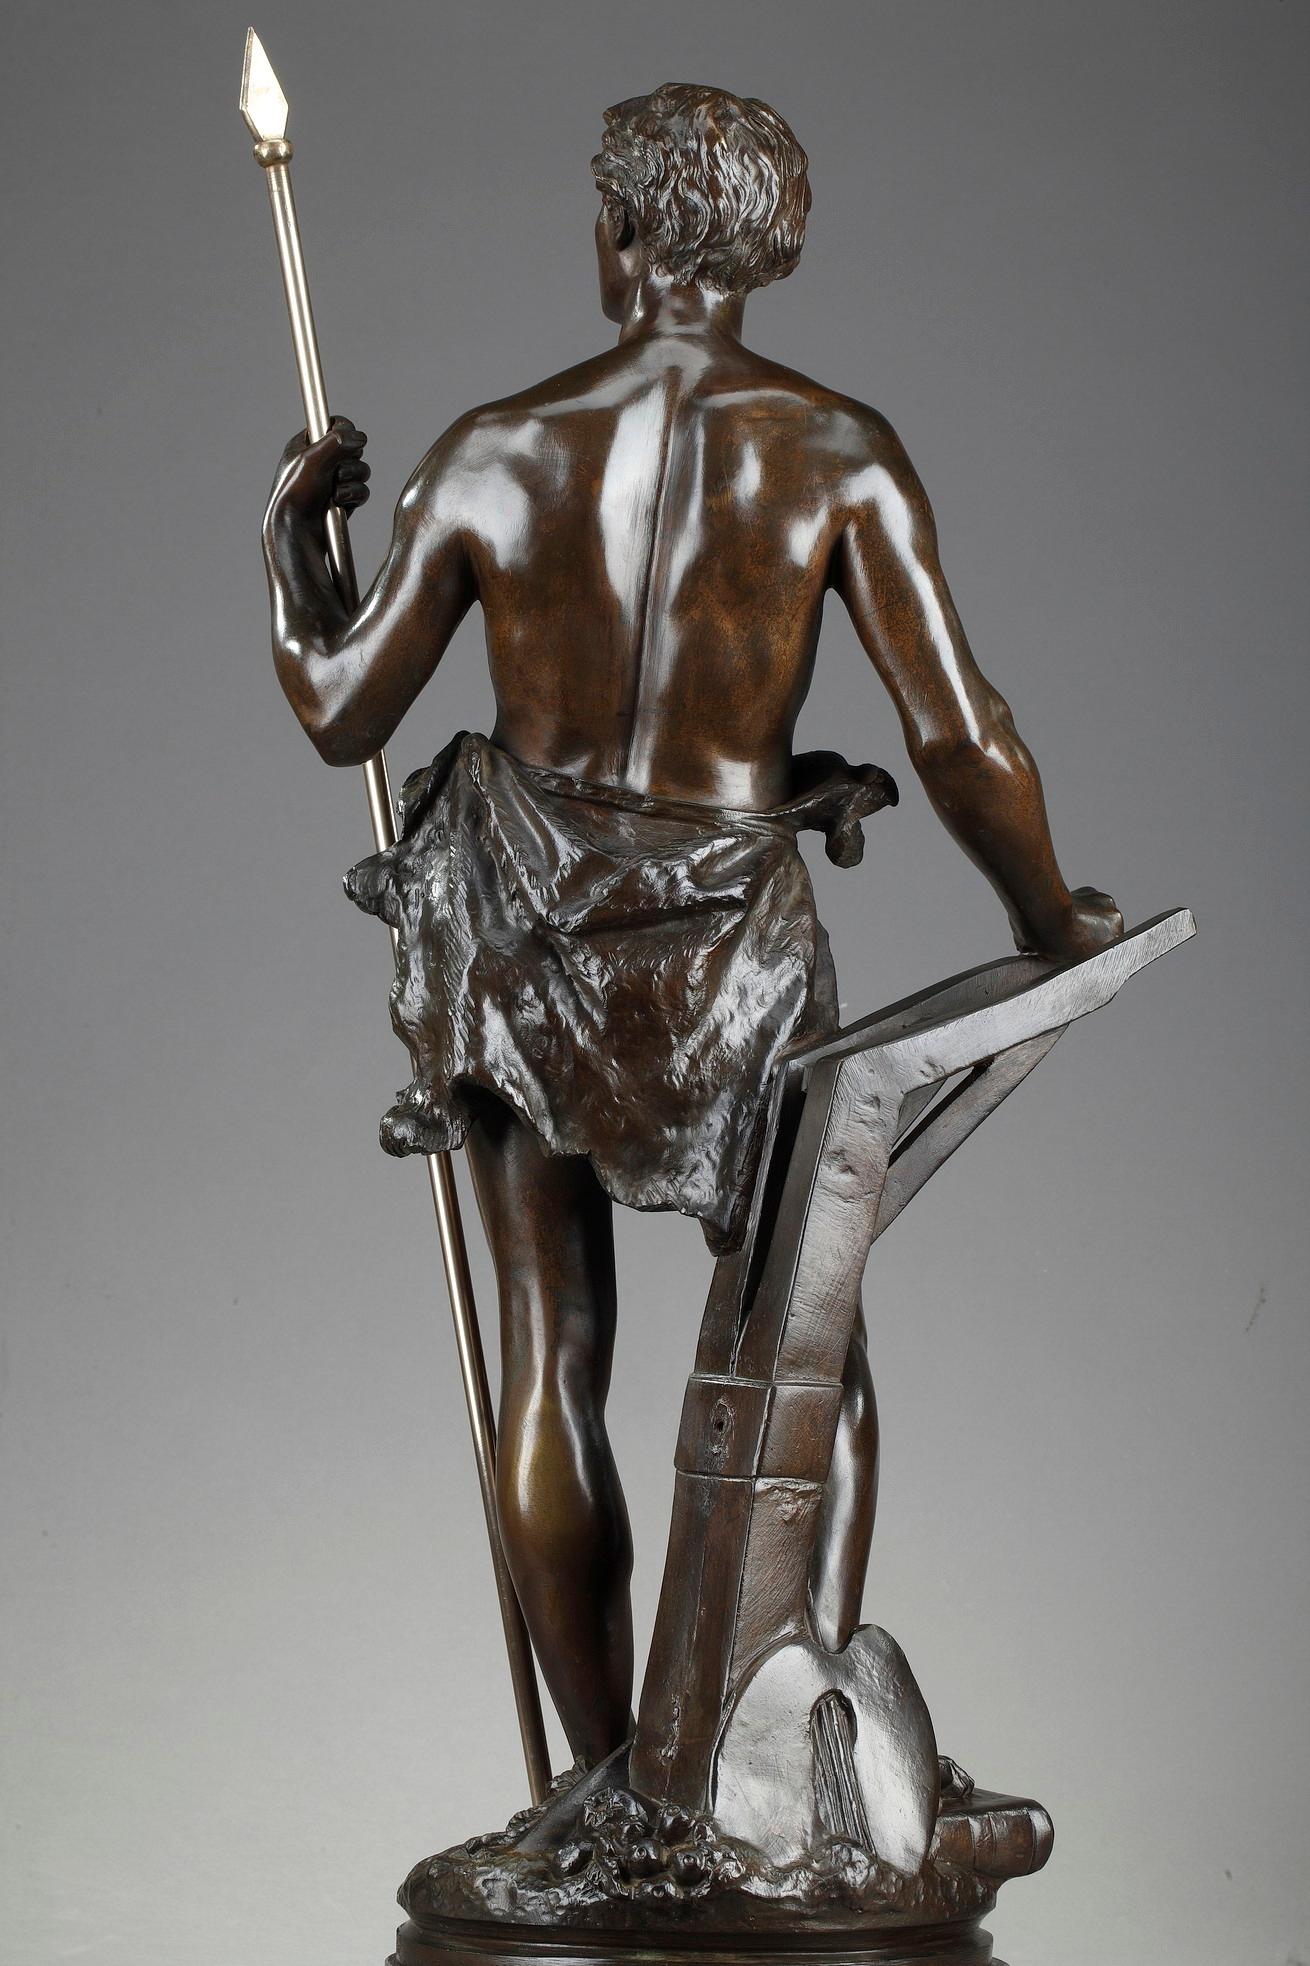 19th Century Bronze Statue: Le Travail, by Ernest Rancoulet In Good Condition For Sale In Paris, FR